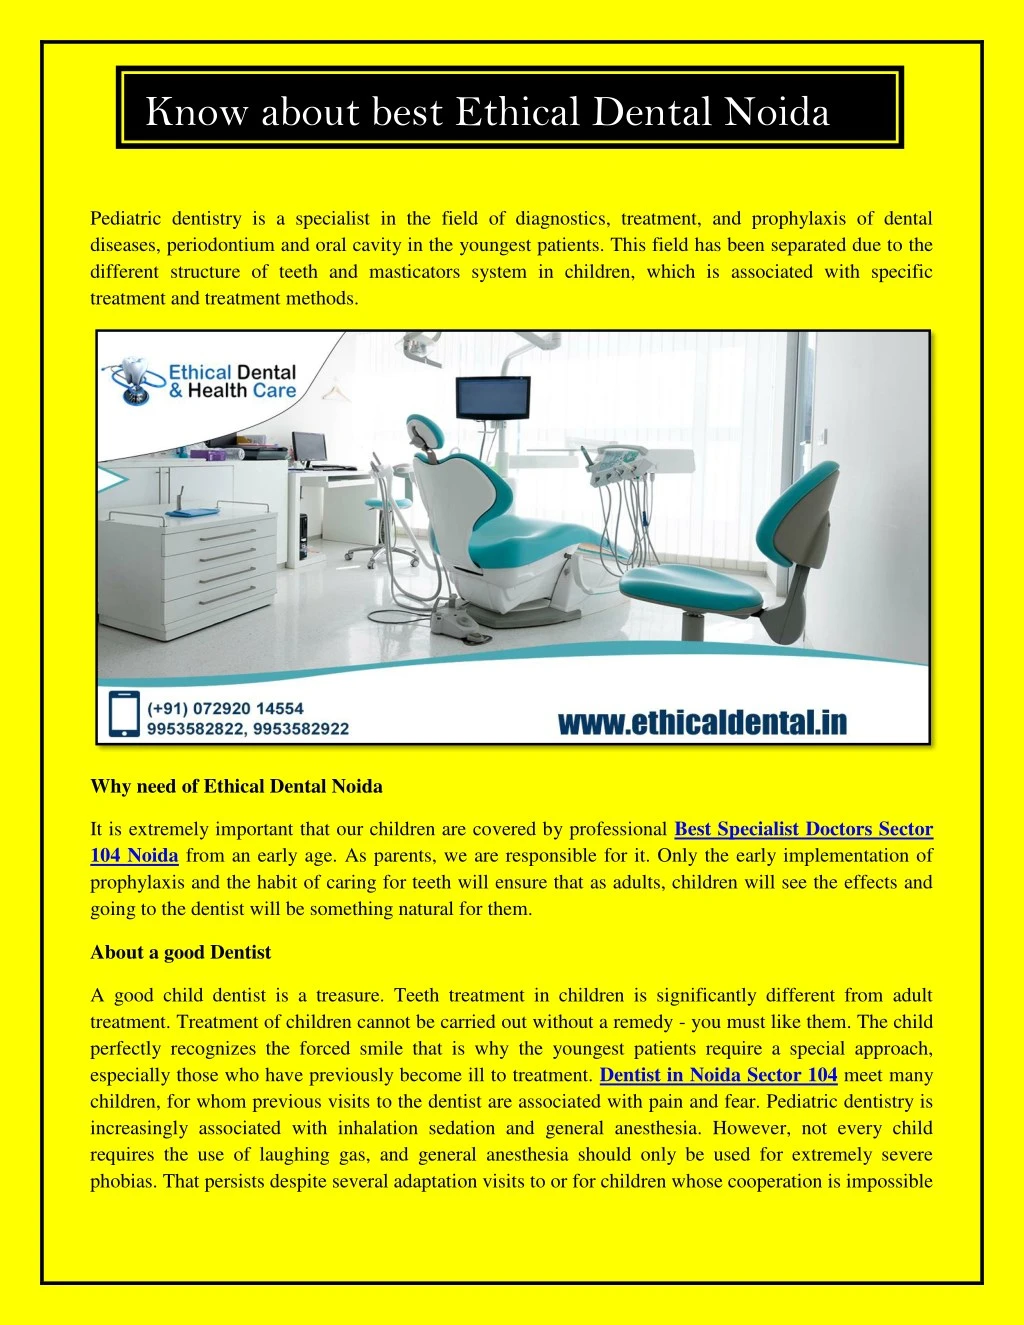 know about best ethical dental noida